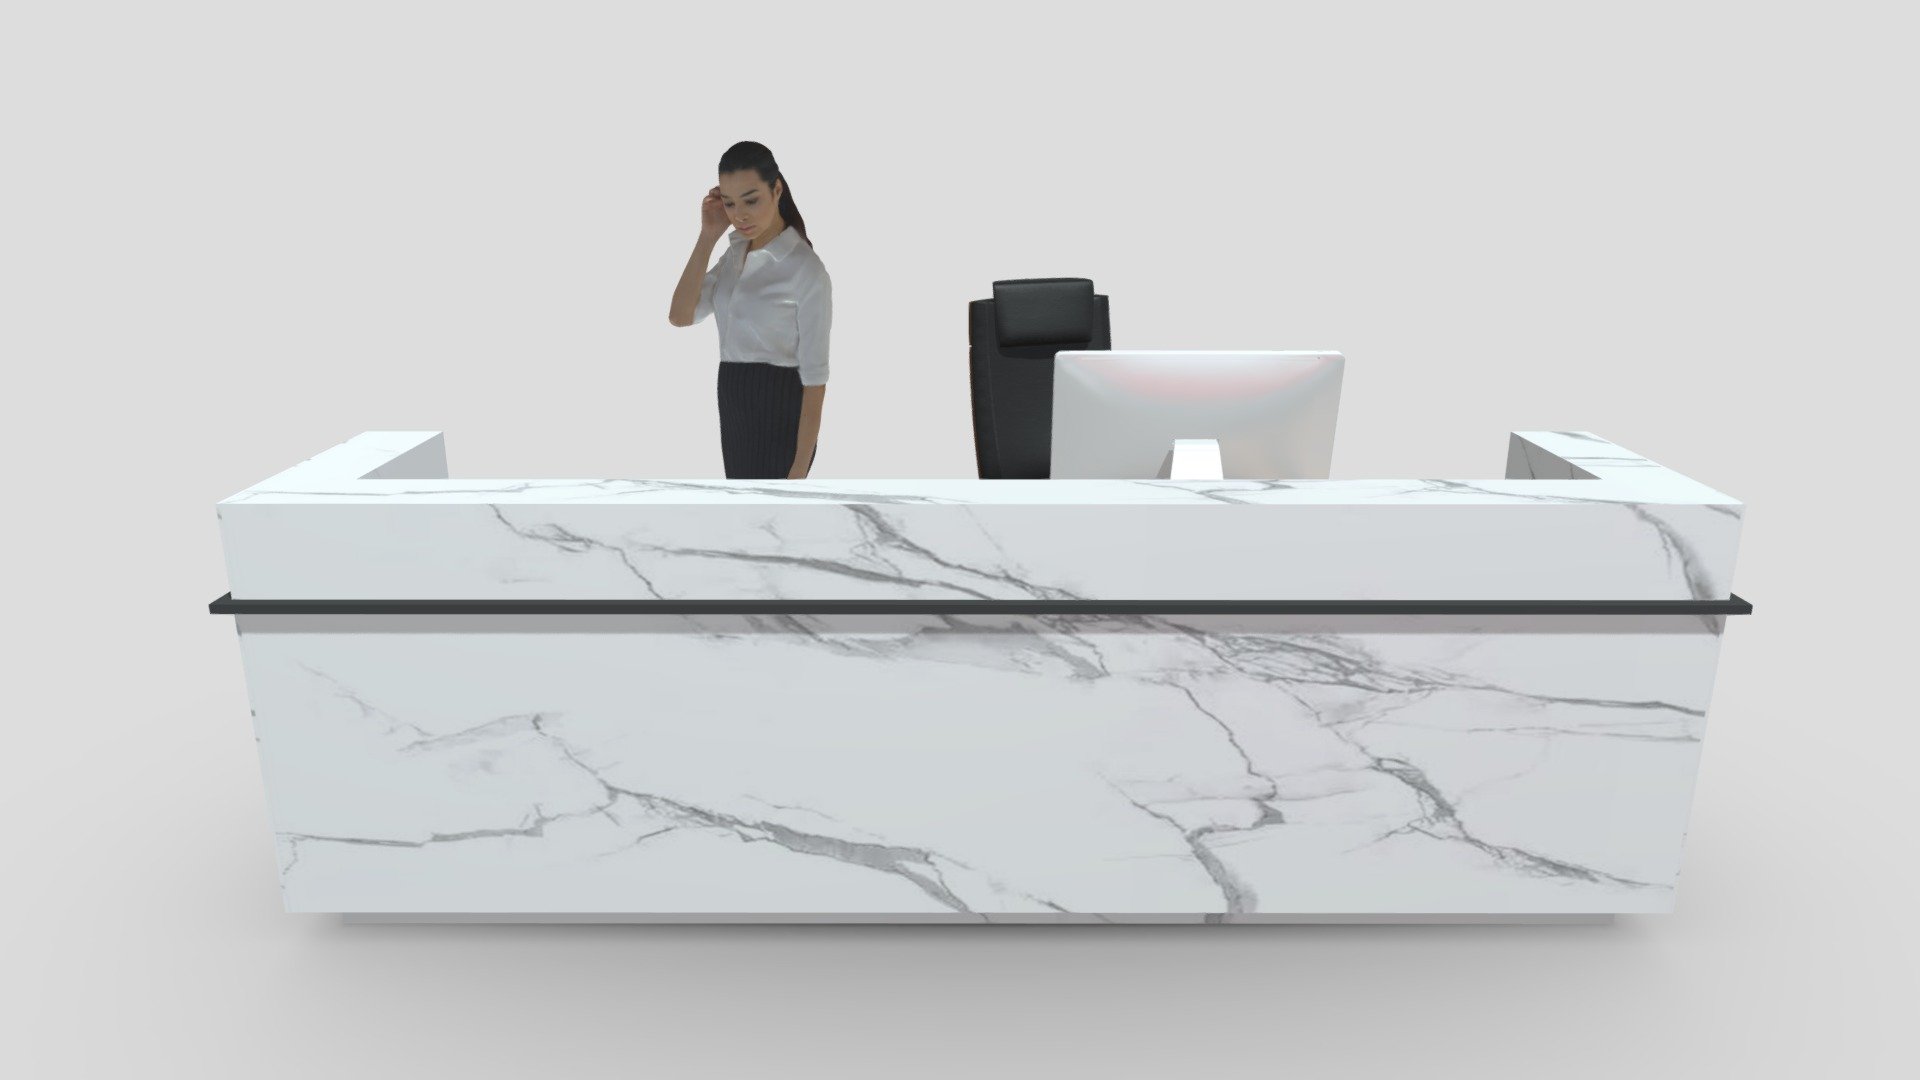 Reception Desk - 024

Native Format File : 3Ds Max 2020 &ndash; Rendering by Vray Next

File save as : 3Ds Max 2017 with converted all object to Editable Poly.

Exporting Formats :
Autodesk FBX ( .fbx ) and OBJ ( .obj &amp; .mtl ).

All 25 Texture maps are include as JPG.

Support 24/7 3d model